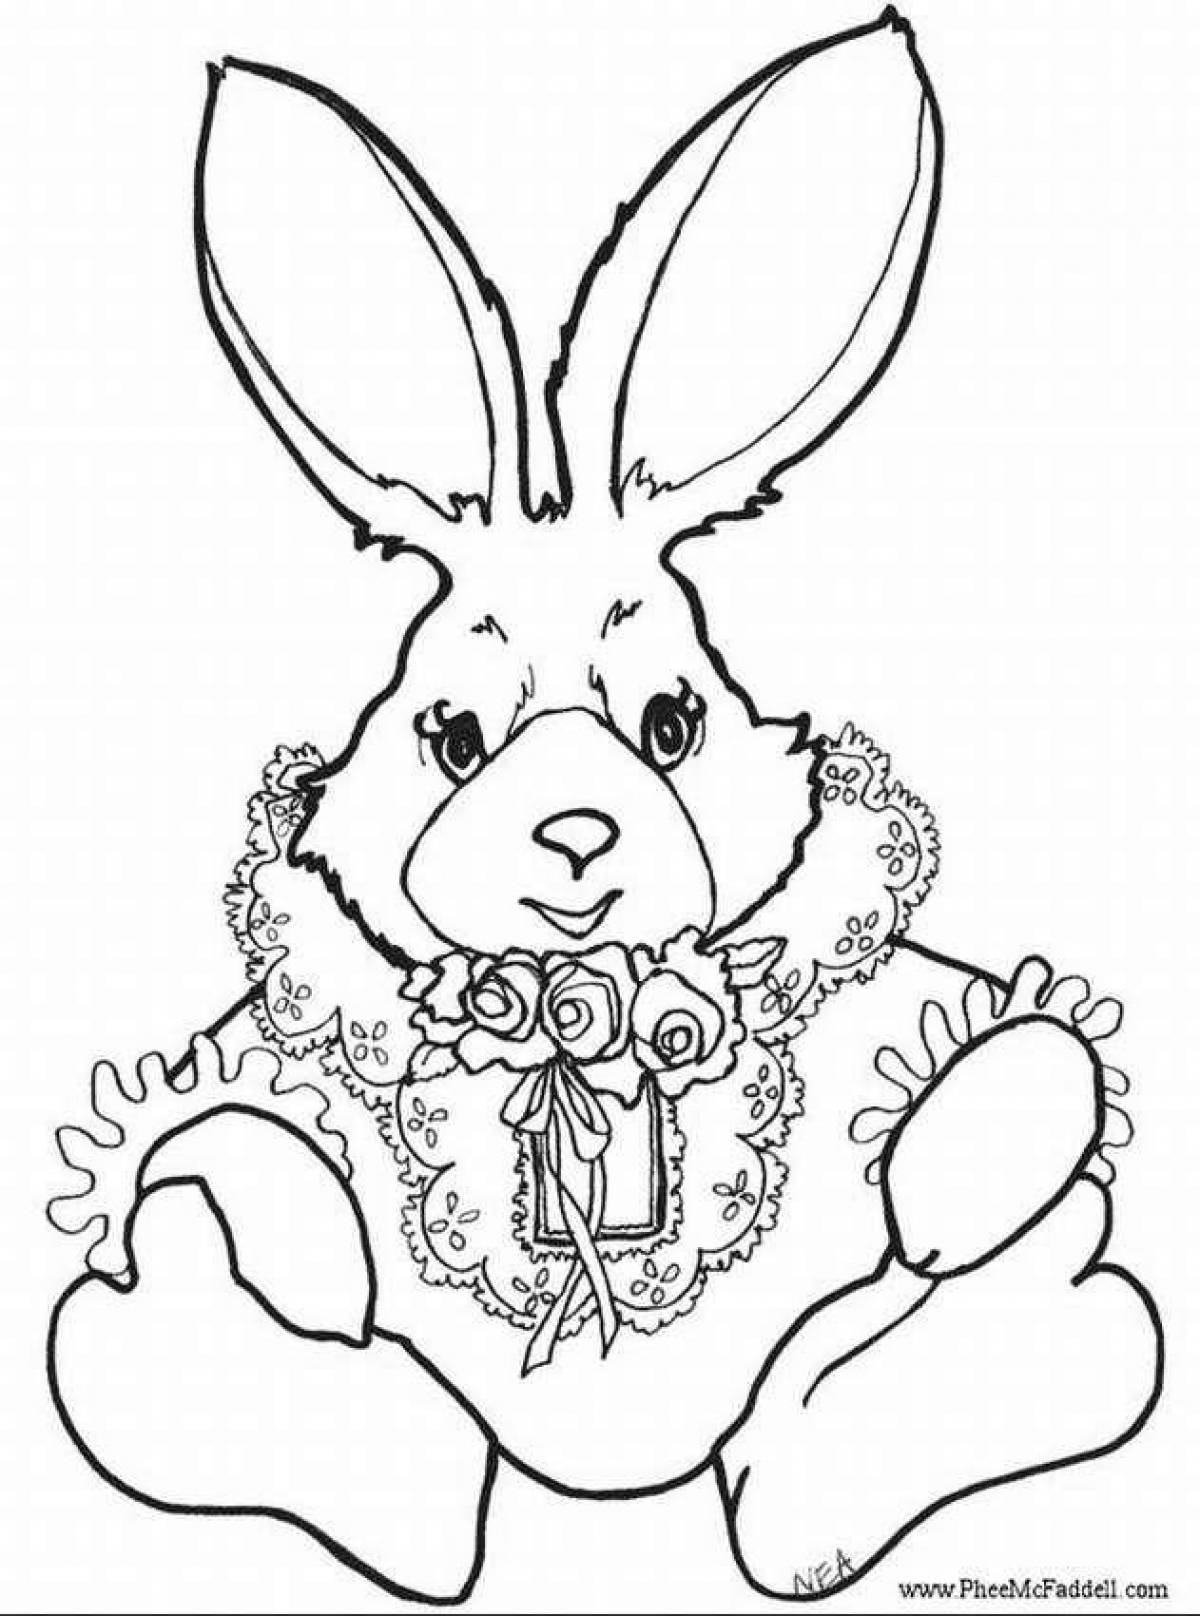 Coloring Page of the Year of the Rabbit